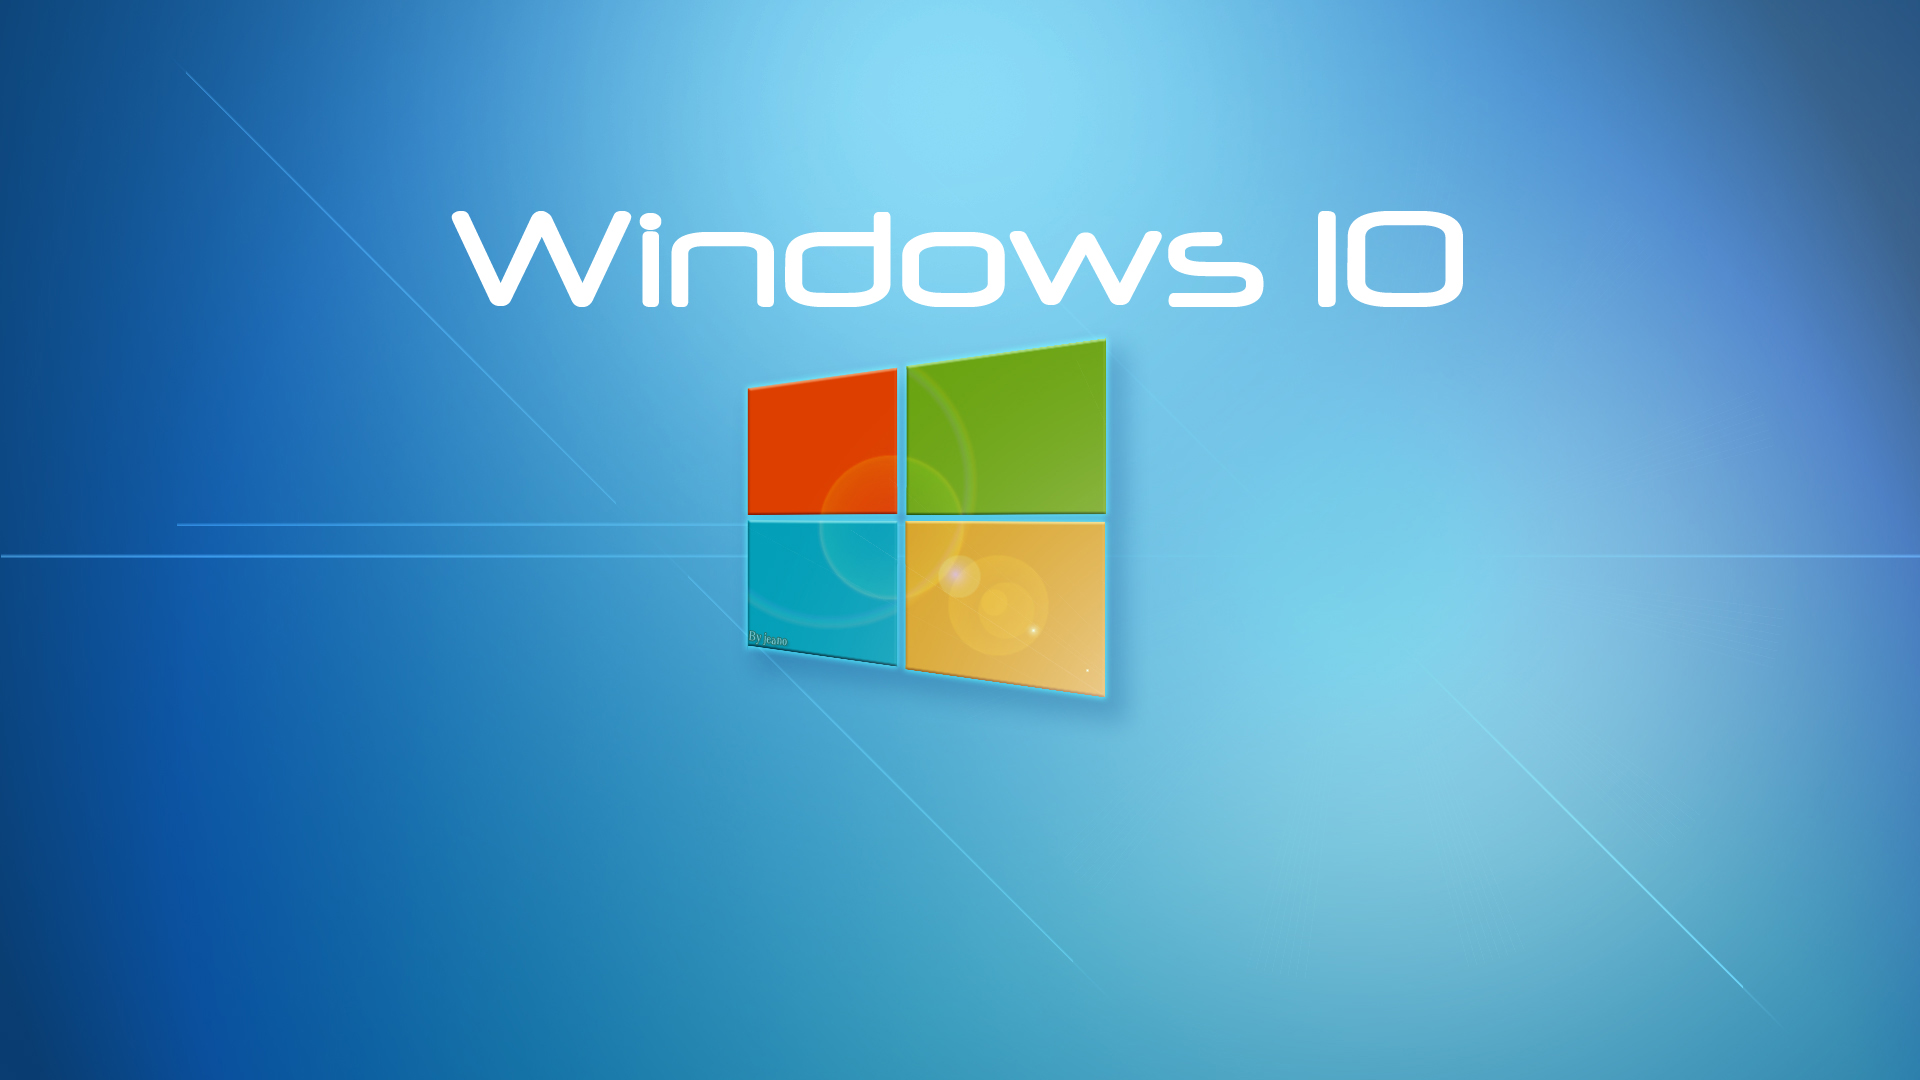 HD Windows Wallpaper Full Pictures